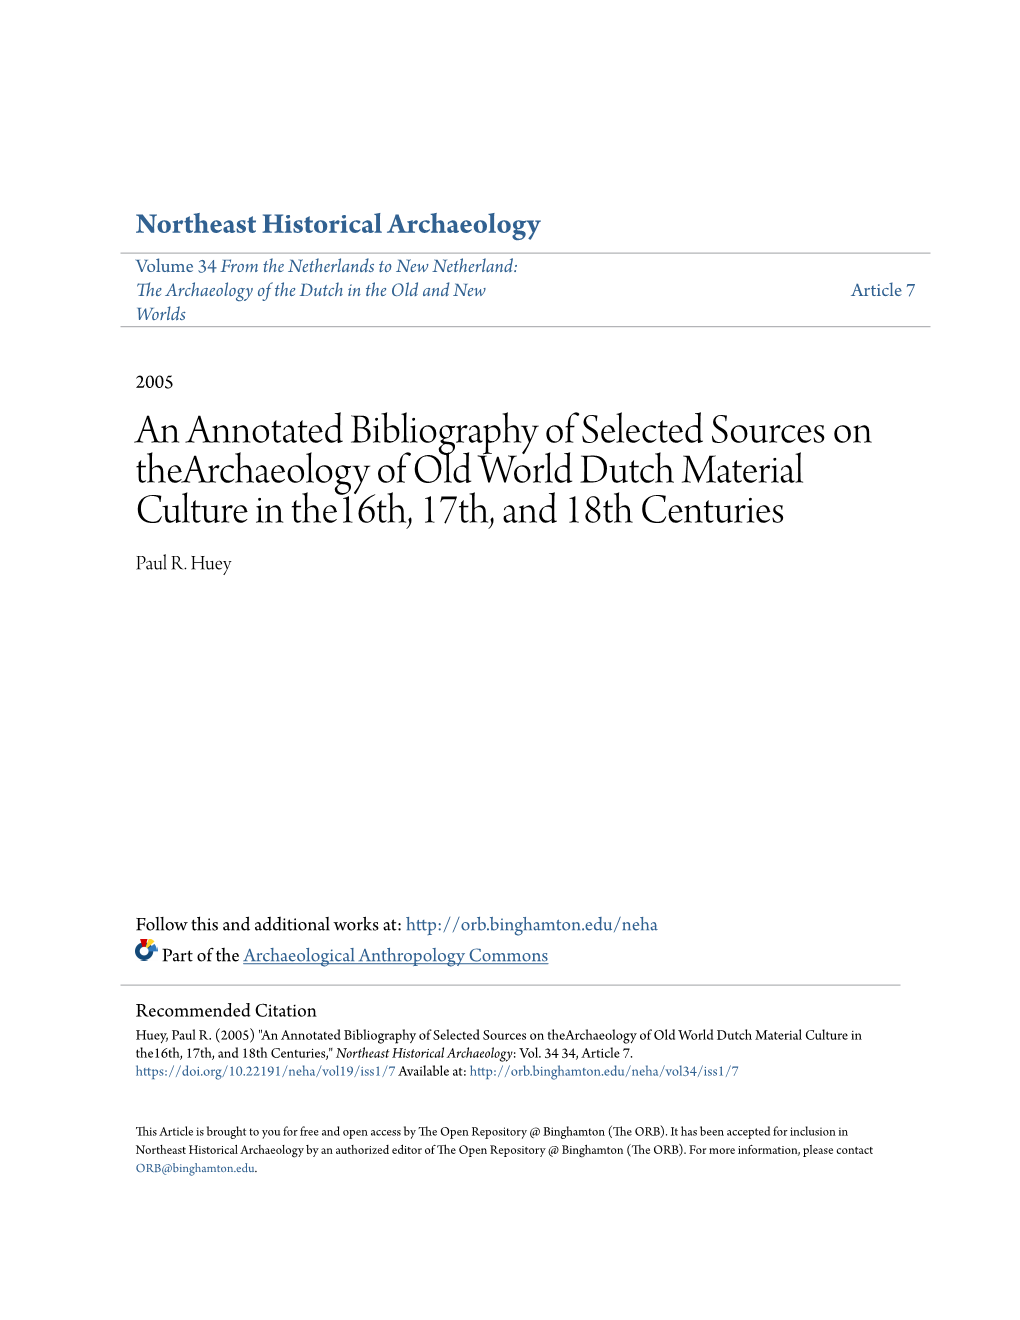 An Annotated Bibliography of Selected Sources on Thearchaeology of Old World Dutch Material Culture in The16th, 17Th, and 18Th Centuries Paul R